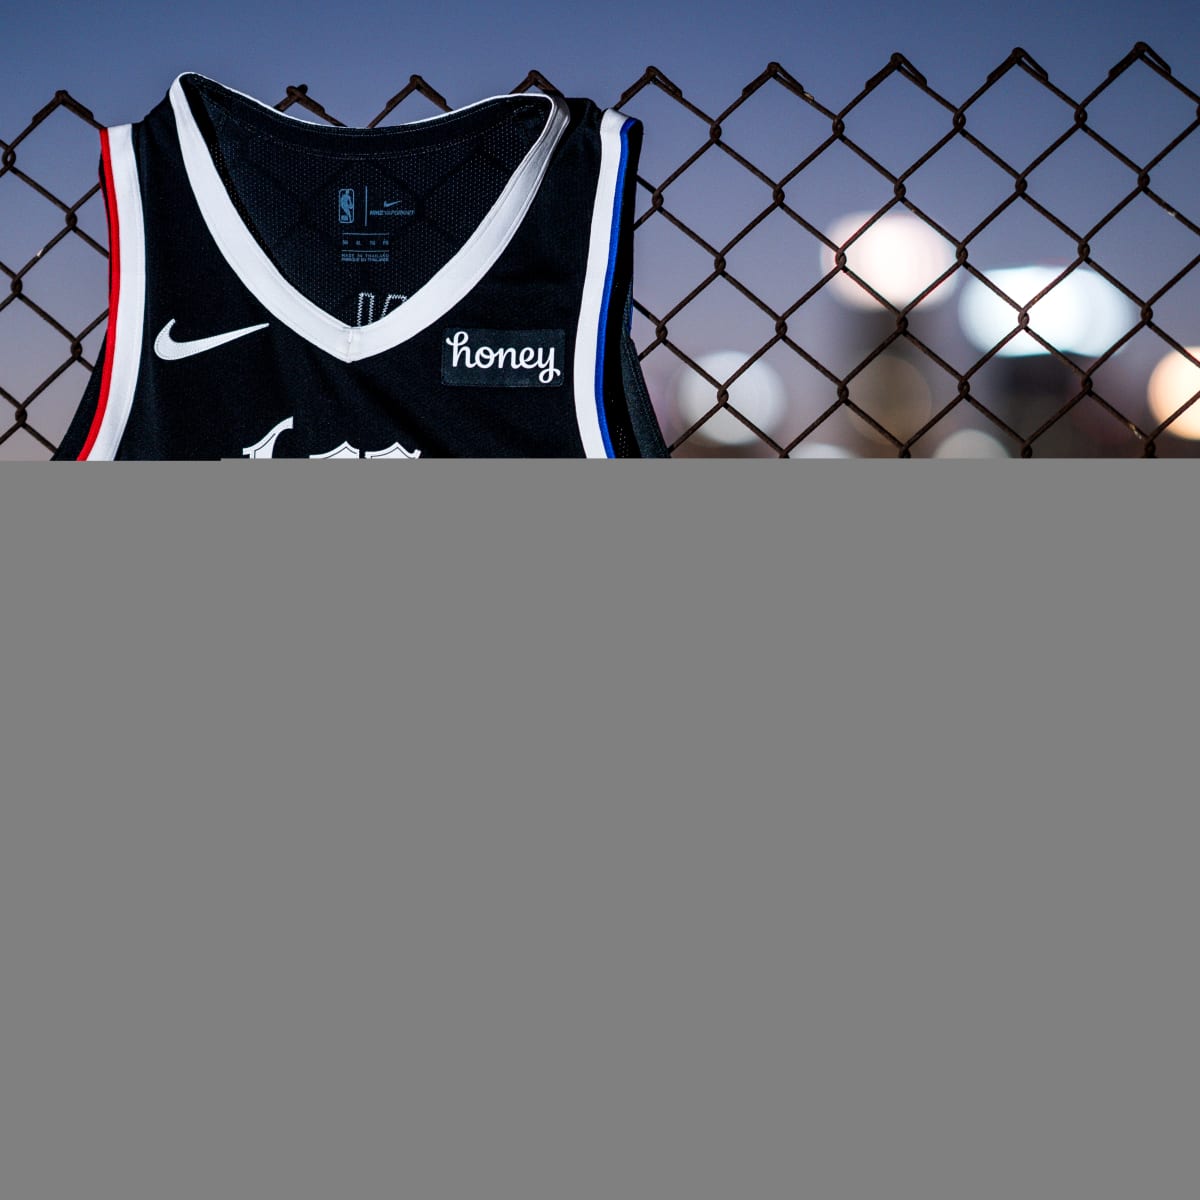 clippers 2021 city jersey - OFF-60% > Shipping free